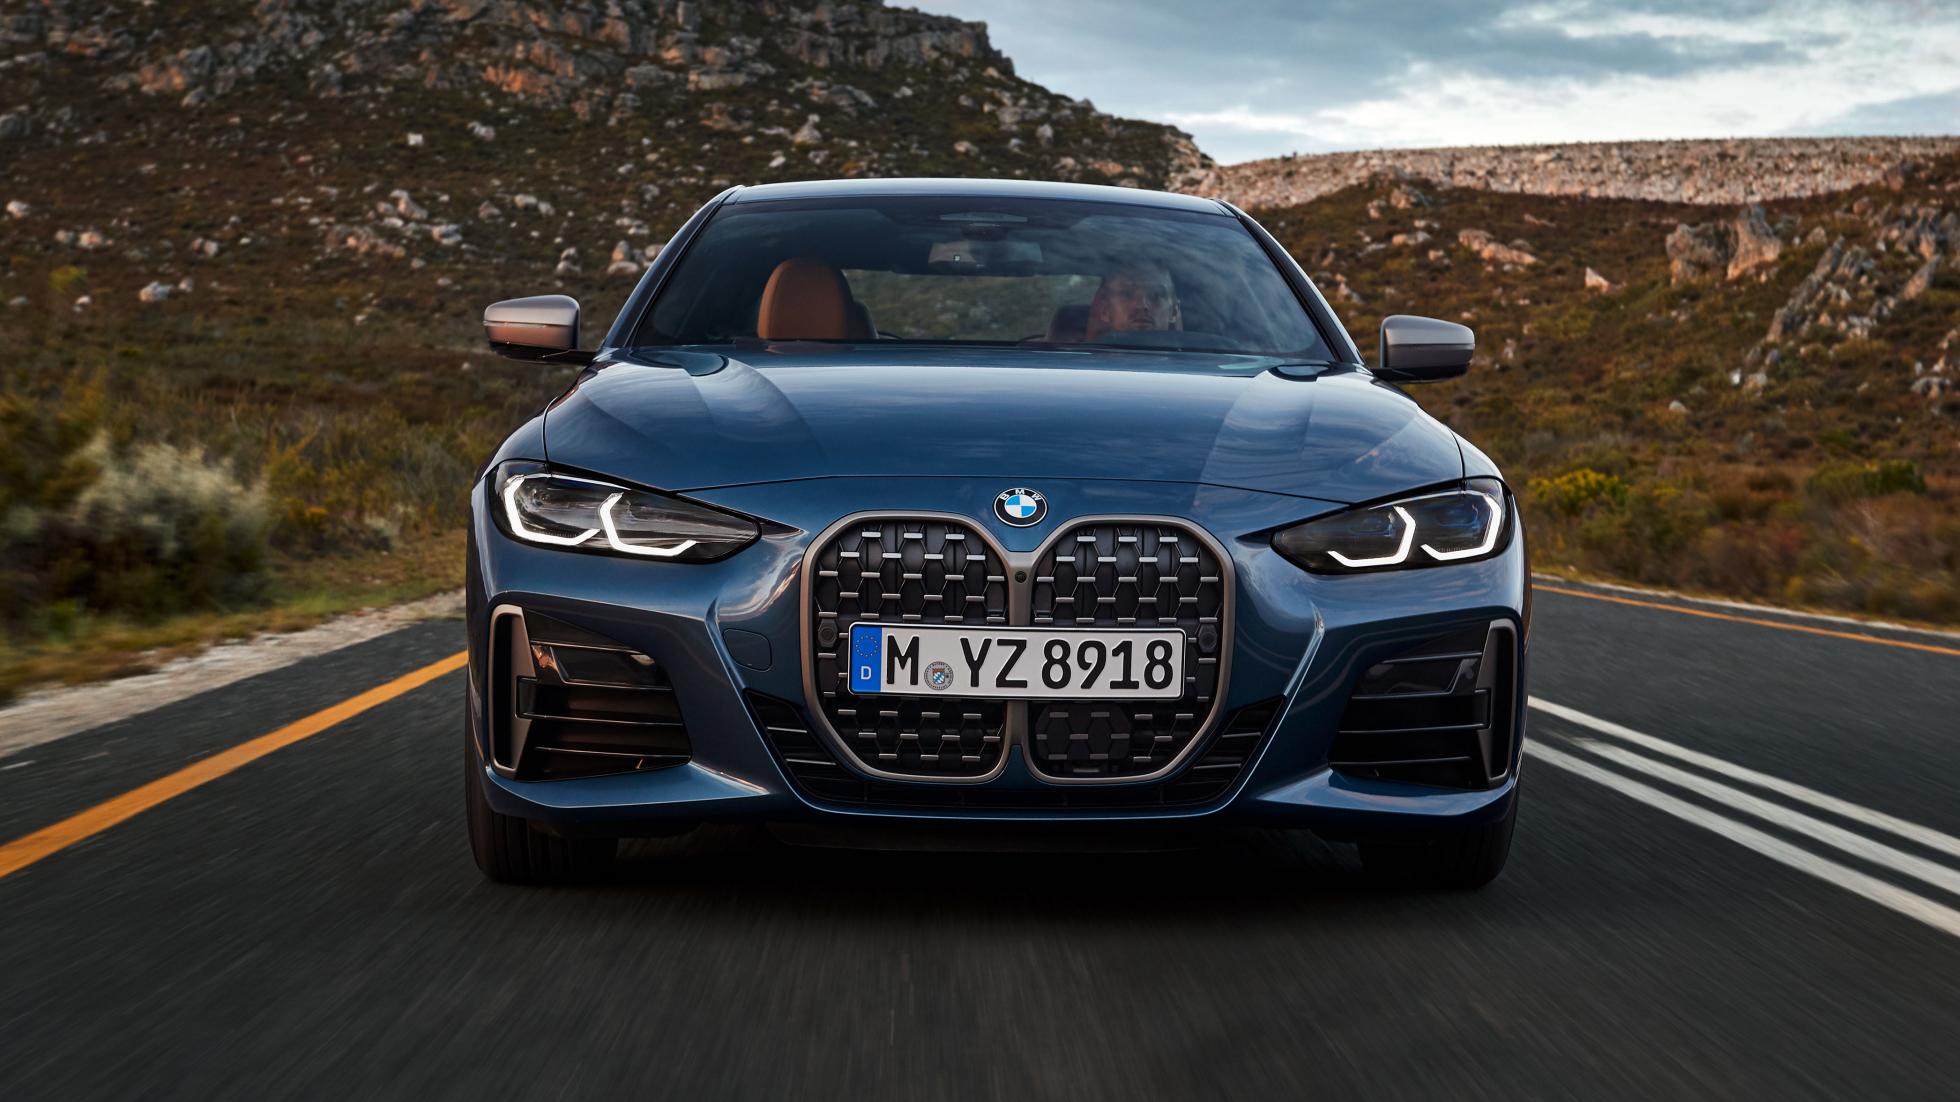 2021 BMW 4 Series (G22 )-- Let's Talk About the New Design